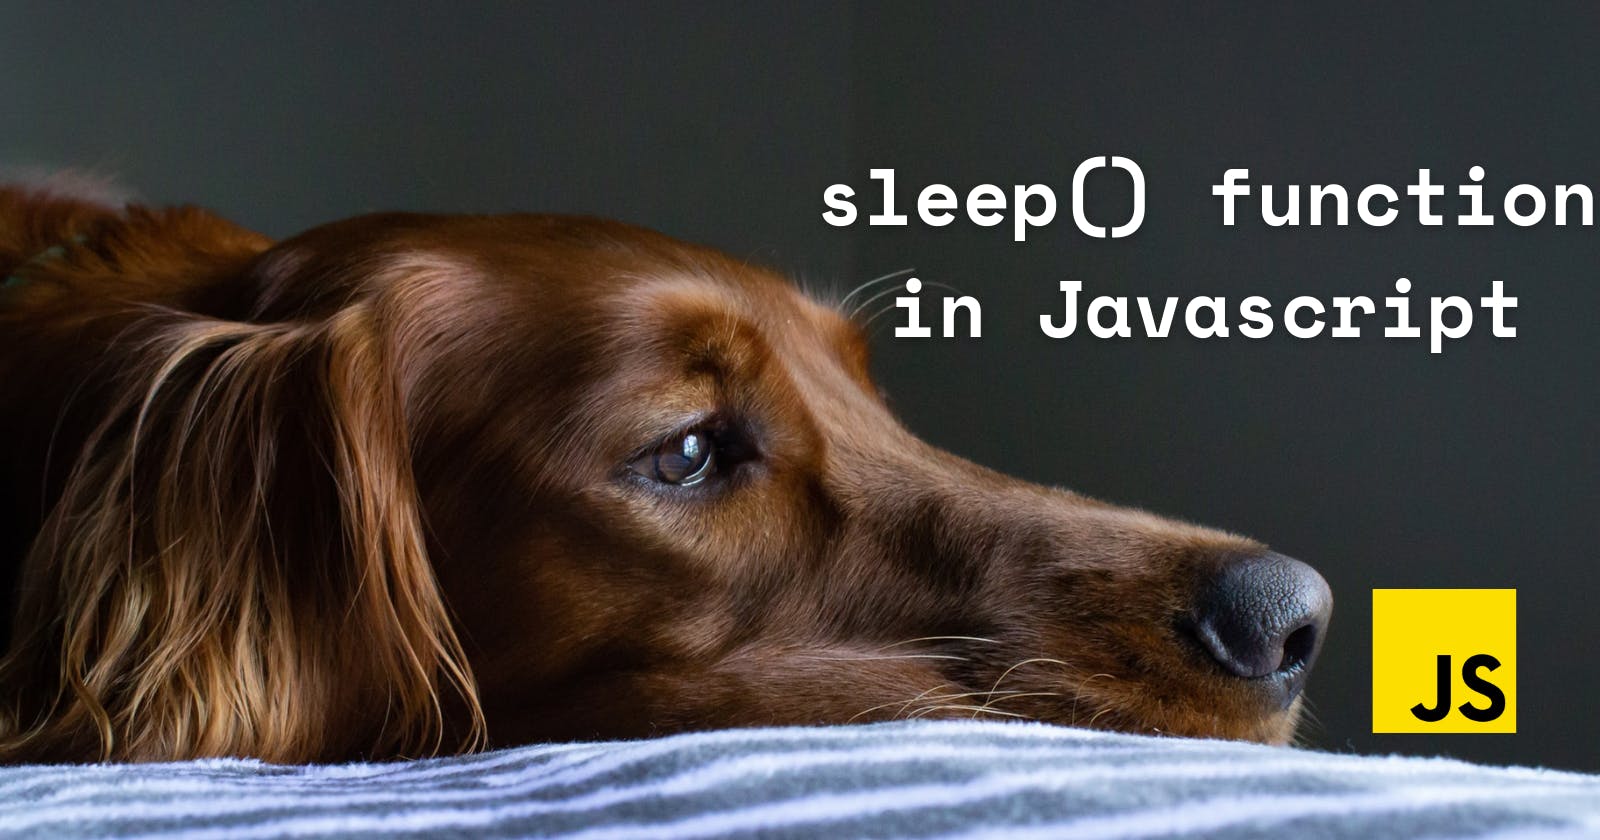 How can you implement the sleep() function in Javascript?